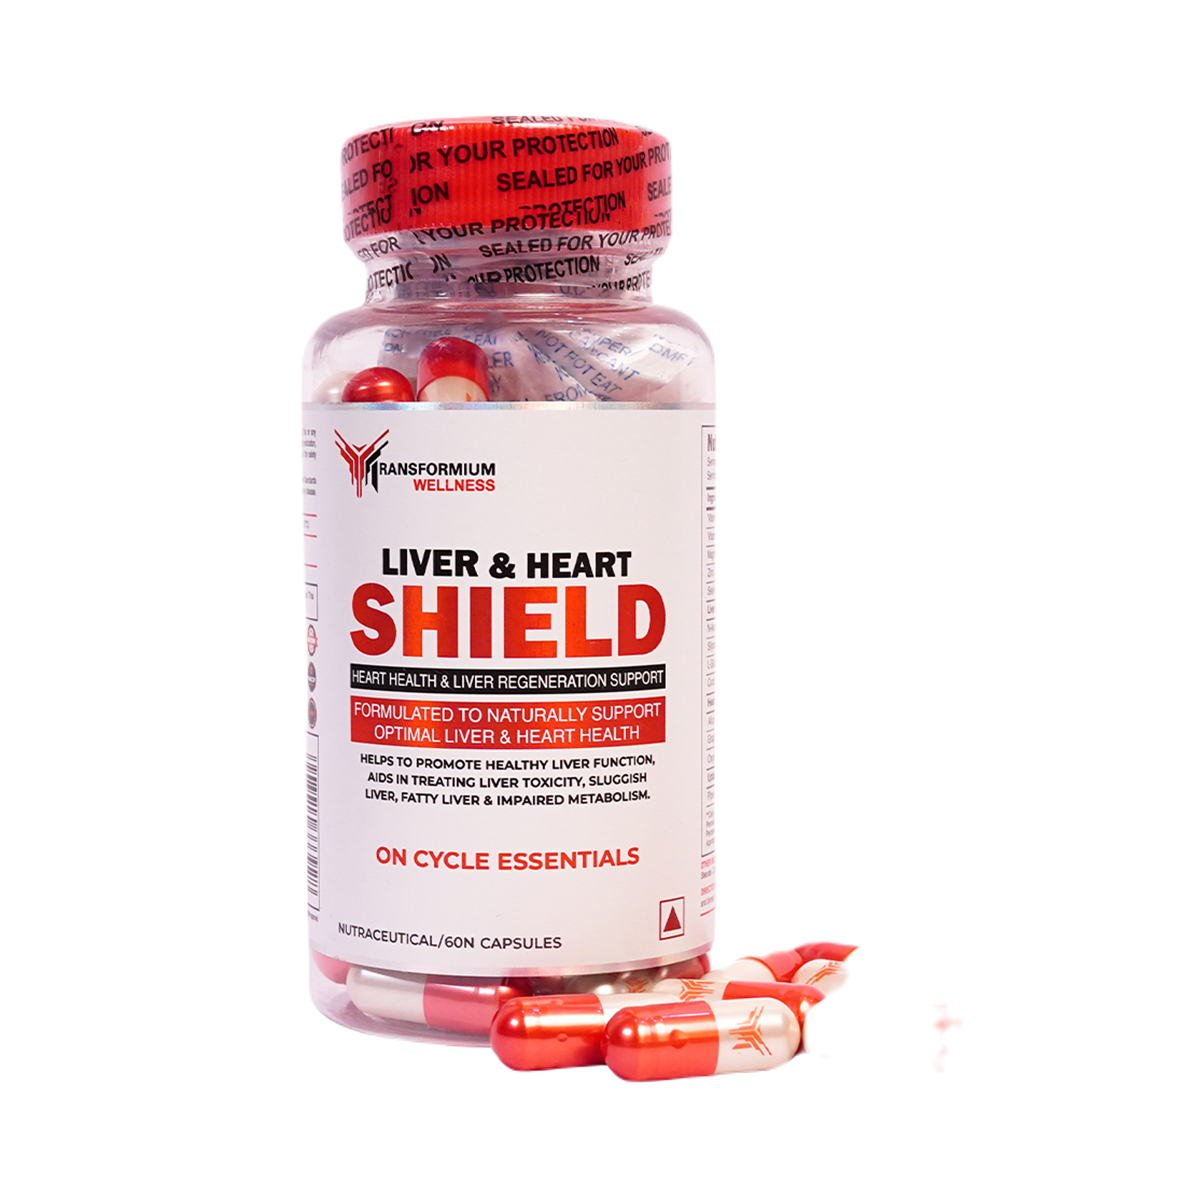 Liver and Heart Shield (Whole Body Detox)